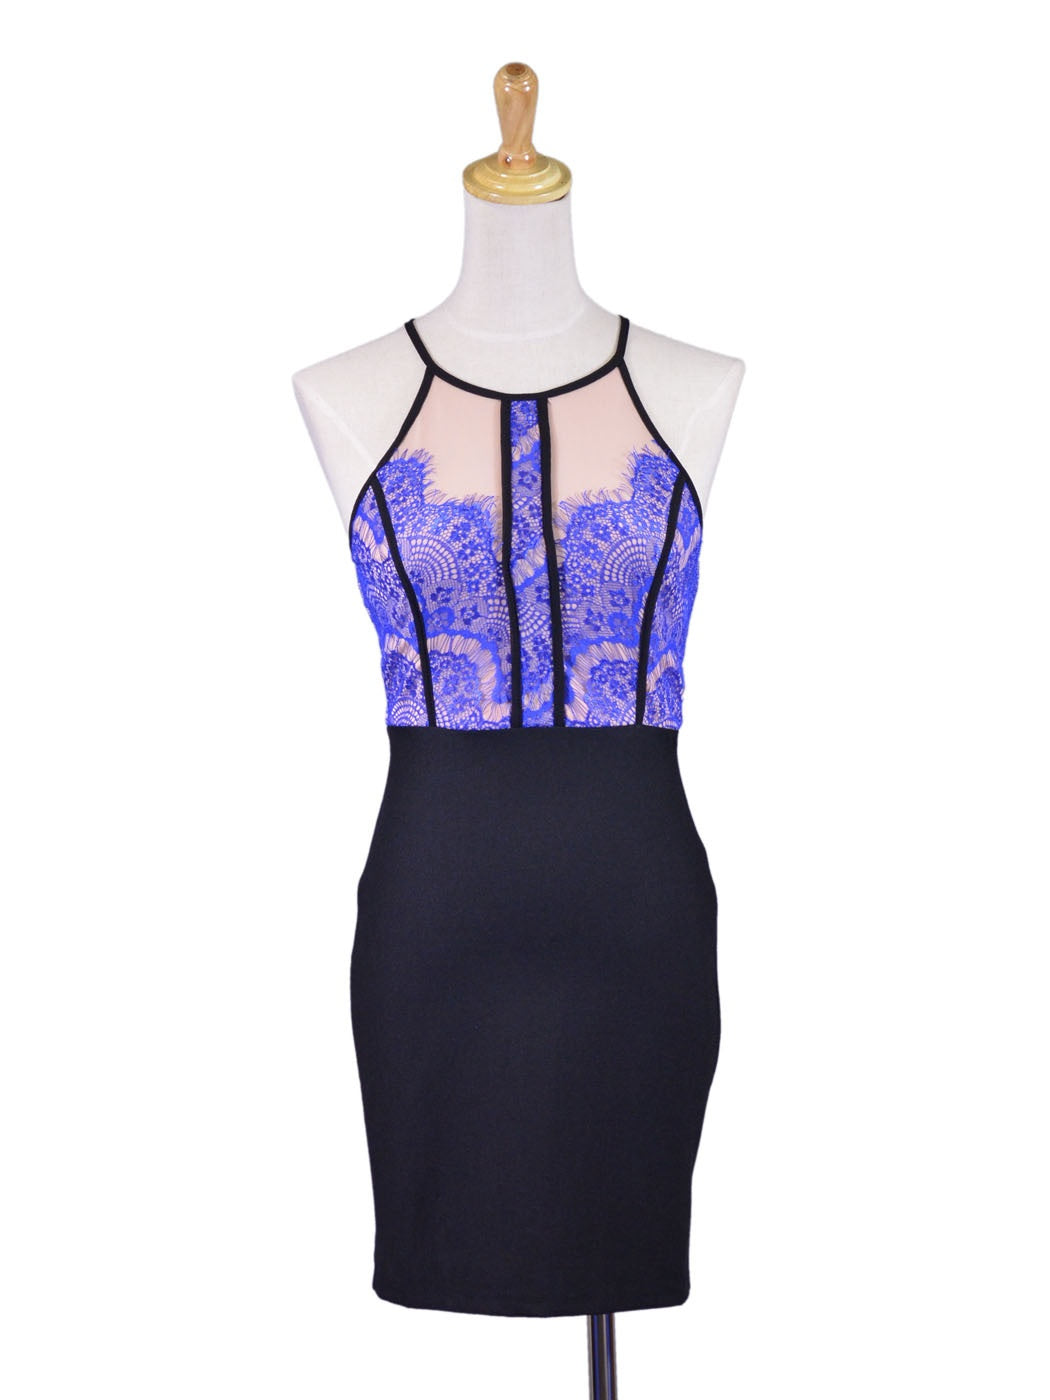 Lush Luxurious Royal Blue Dainty Lace Bodycon Evening Cocktail Party Dress